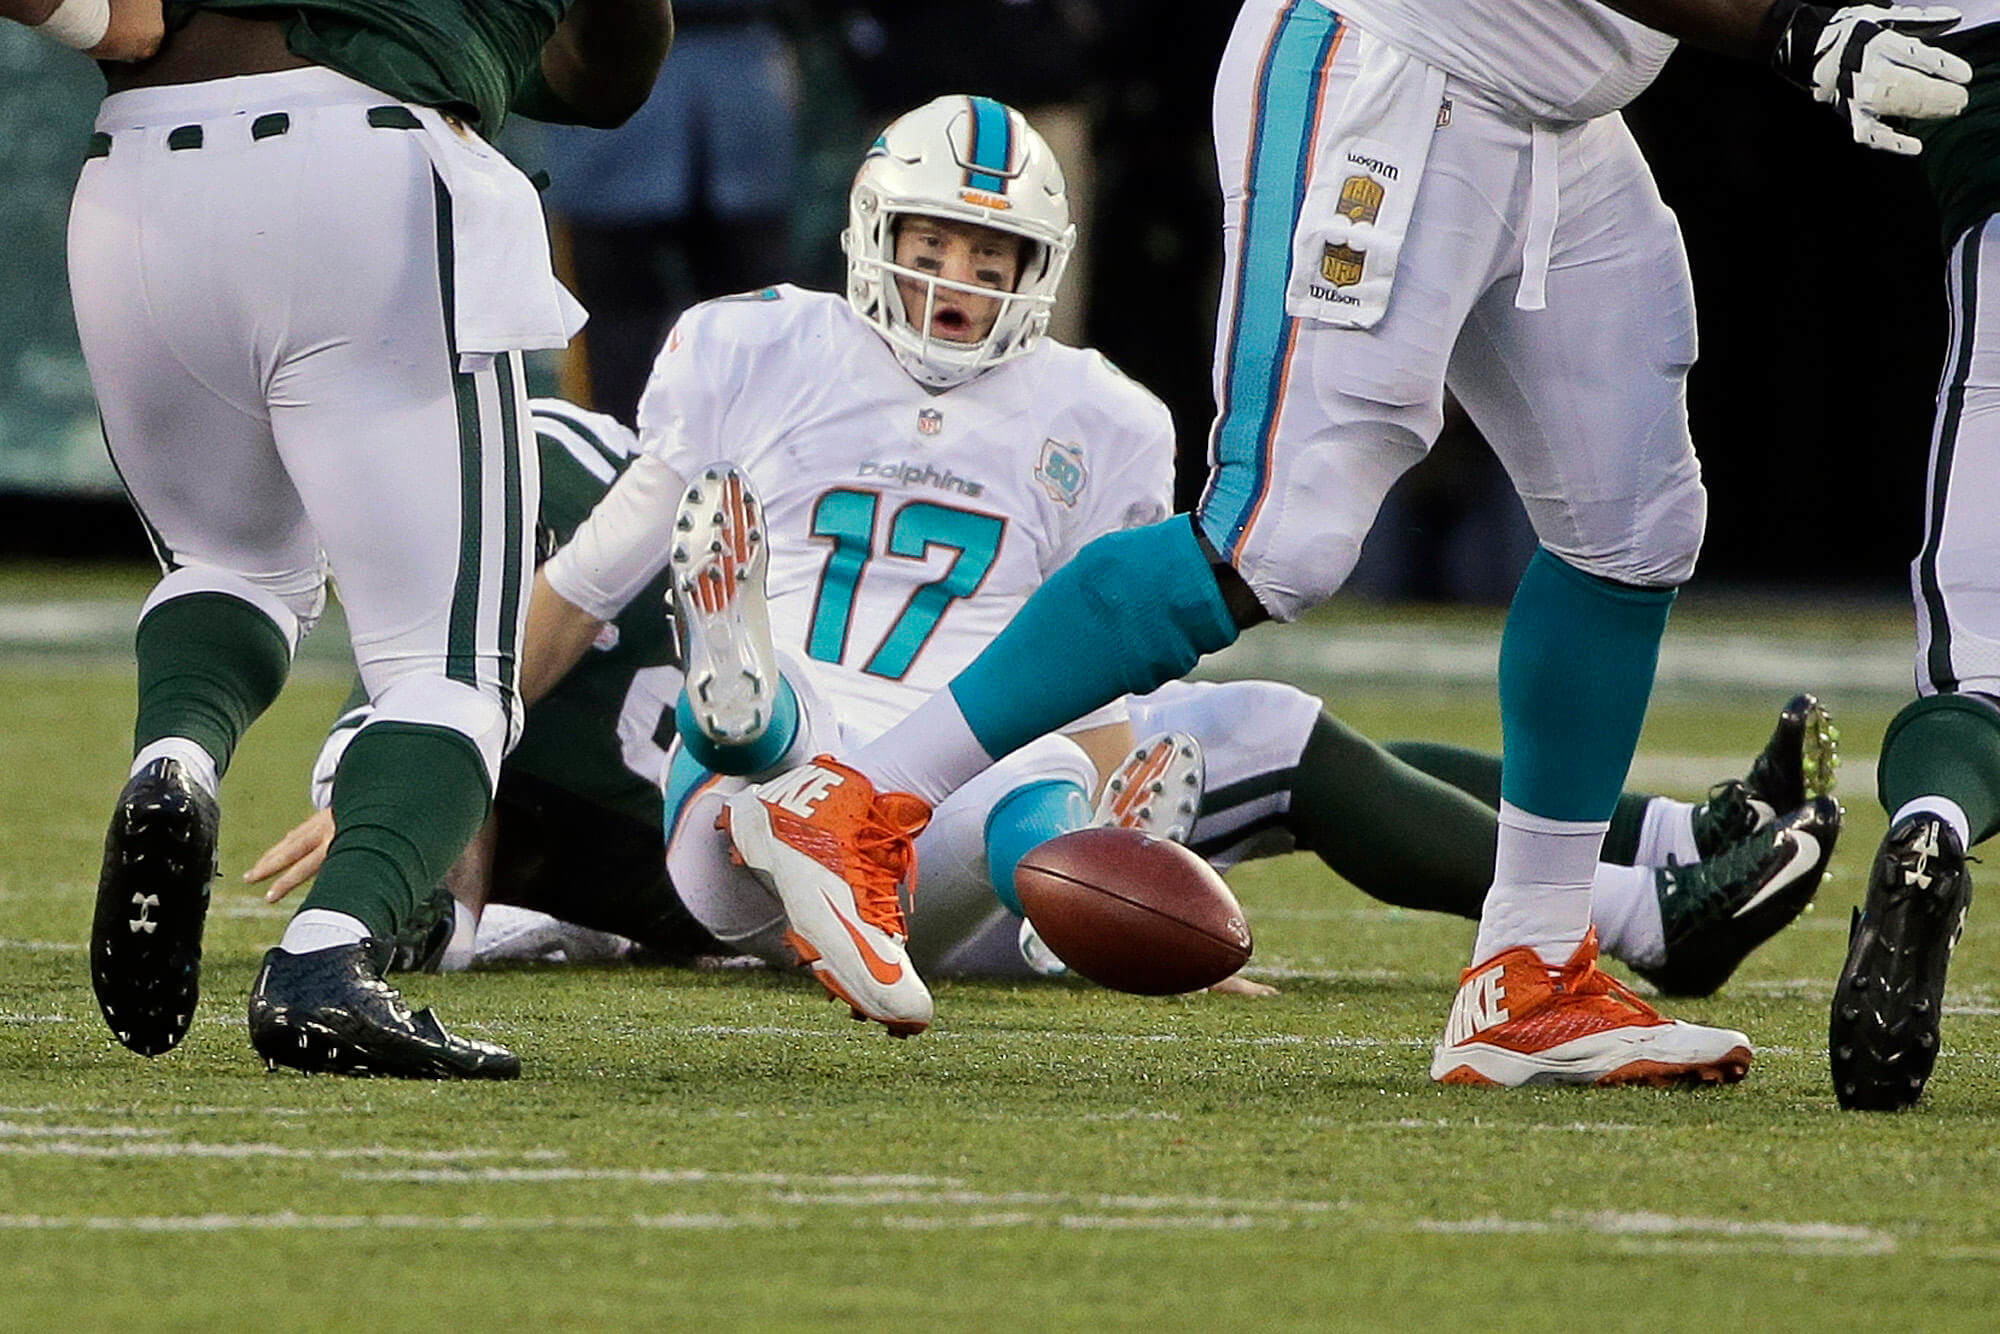 2000x1334 Miami Dolphins quarterback Ryan Tannehill (17) fumbles the ball after being  sacked by New